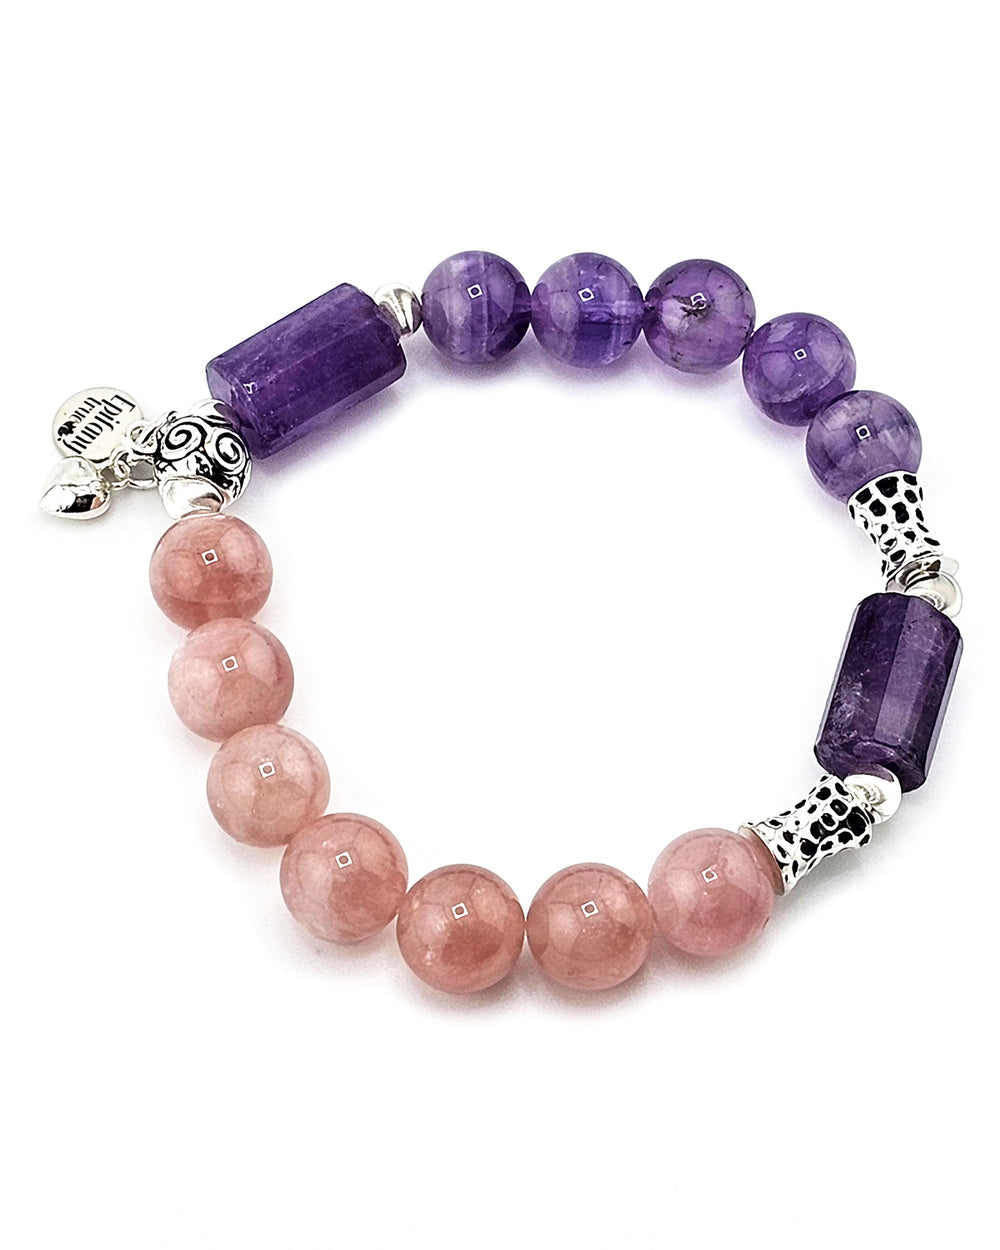 Strong Love Healing Intention Bracelet with Amethyst, Madagascar Rose Quartz and 925 Sterling Silver 7 inch